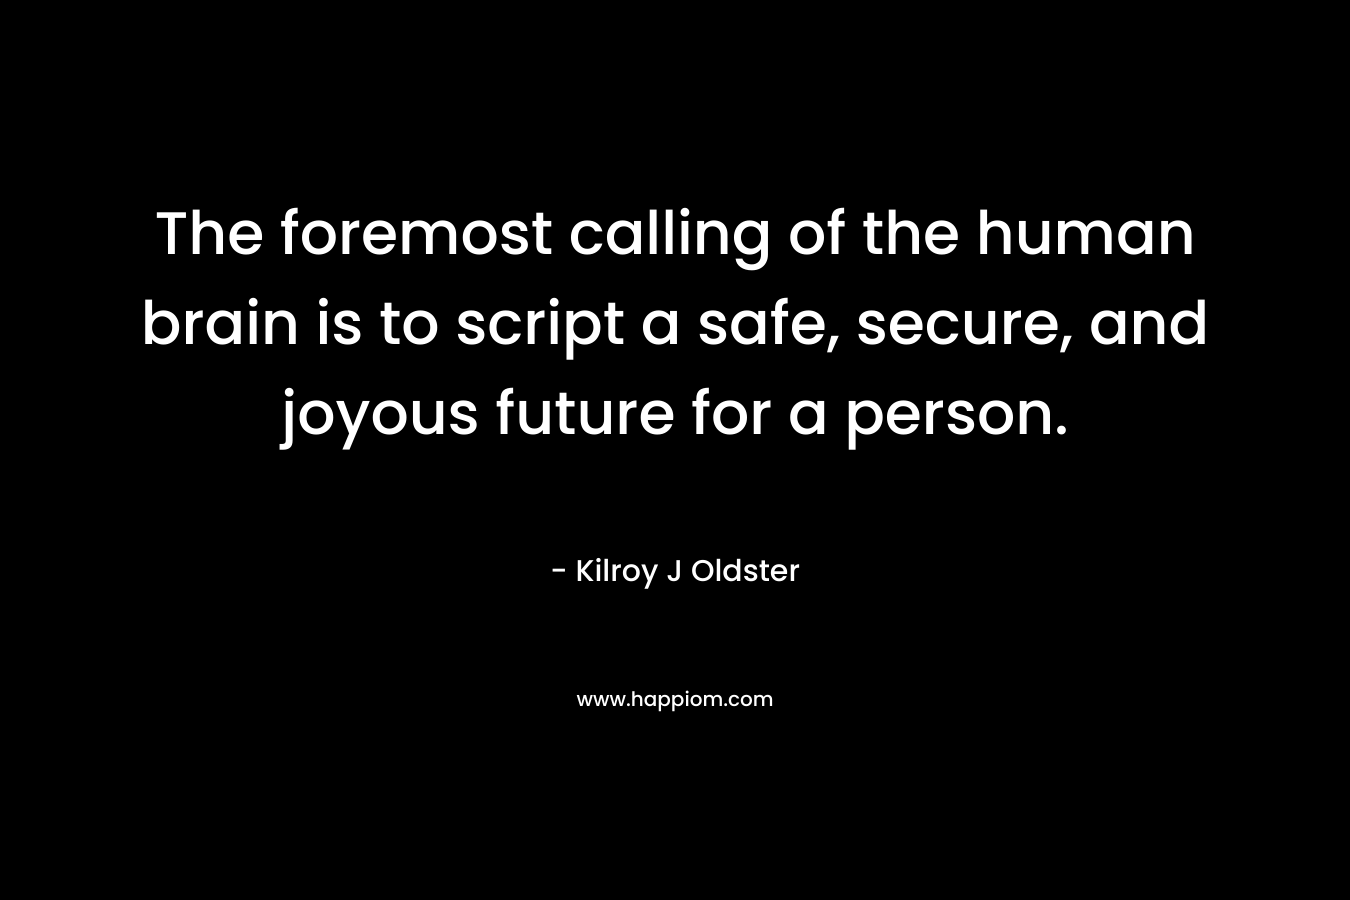 The foremost calling of the human brain is to script a safe, secure, and joyous future for a person.